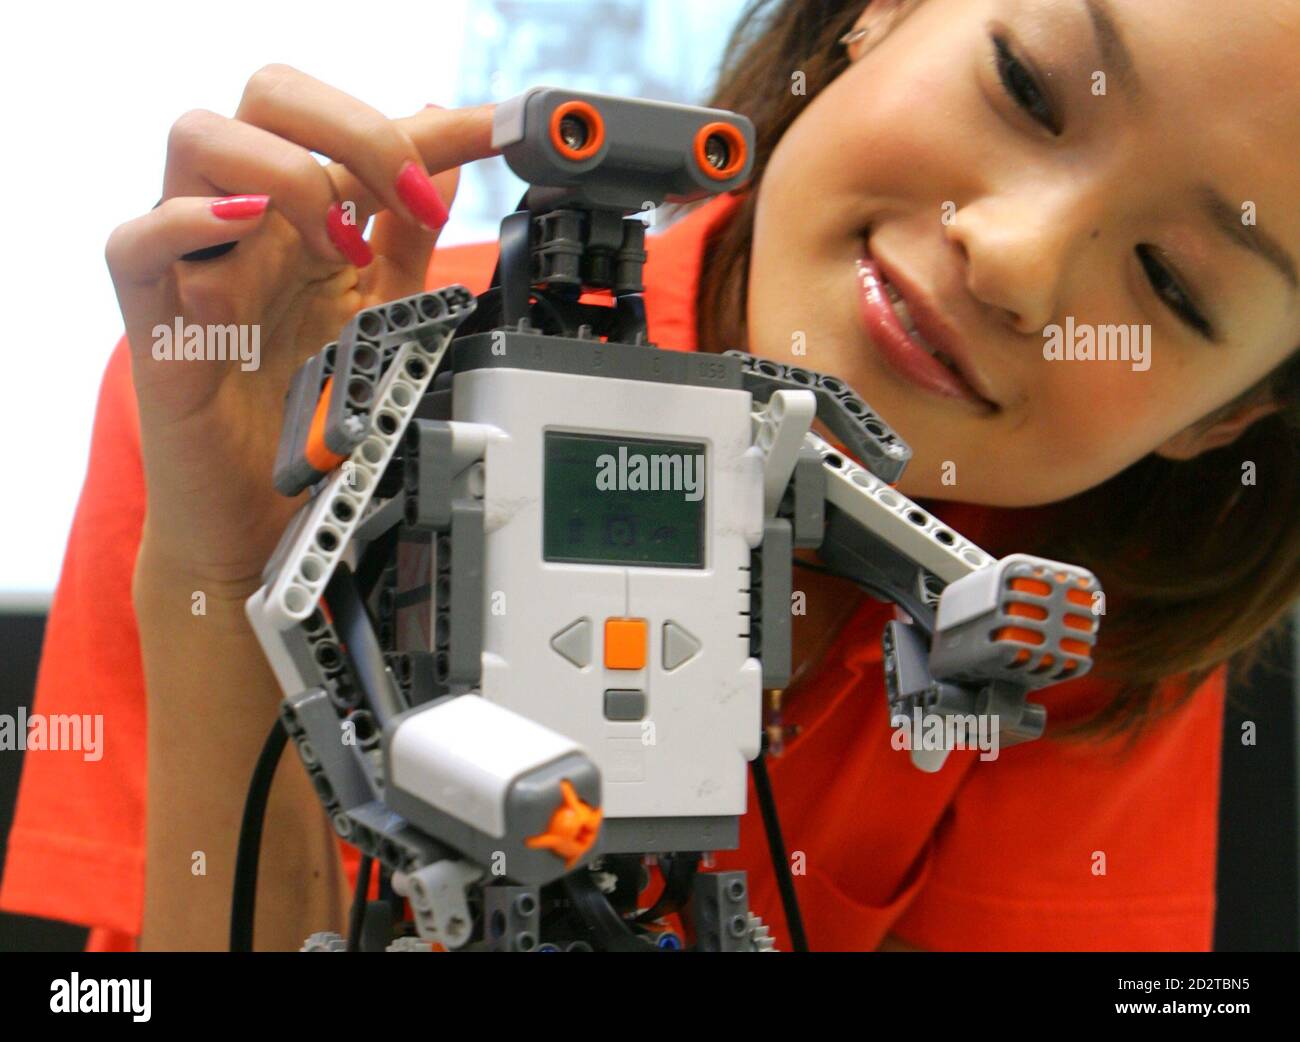 Japanese model Akiko Fukuda presents Lego Group's new educational robot "LEGO  MINDSTORMS NXT", equipped with a 32-bit microprocessor, USB 2.0, and  Bluetooth during a press preview in Tokyo in this June 6,